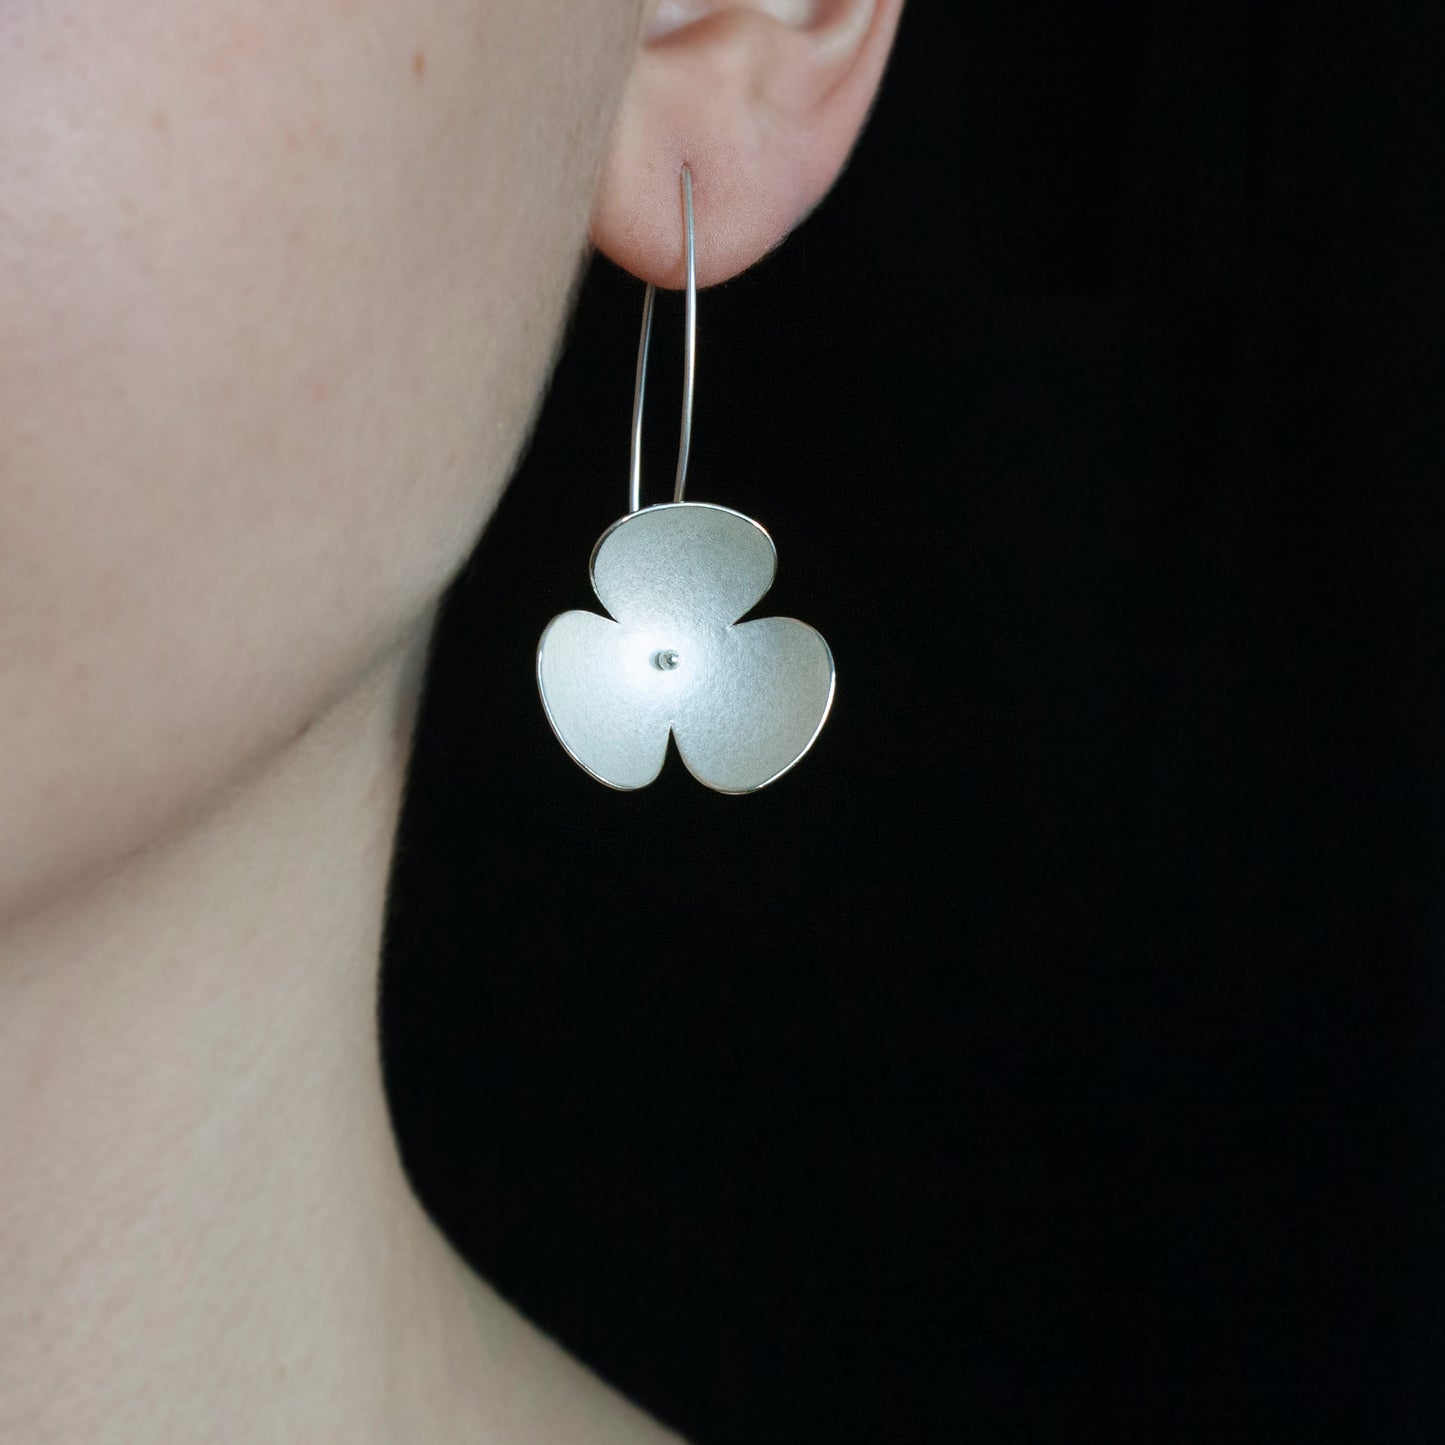 Silver Poppy headband, which becomes a set of jewellery